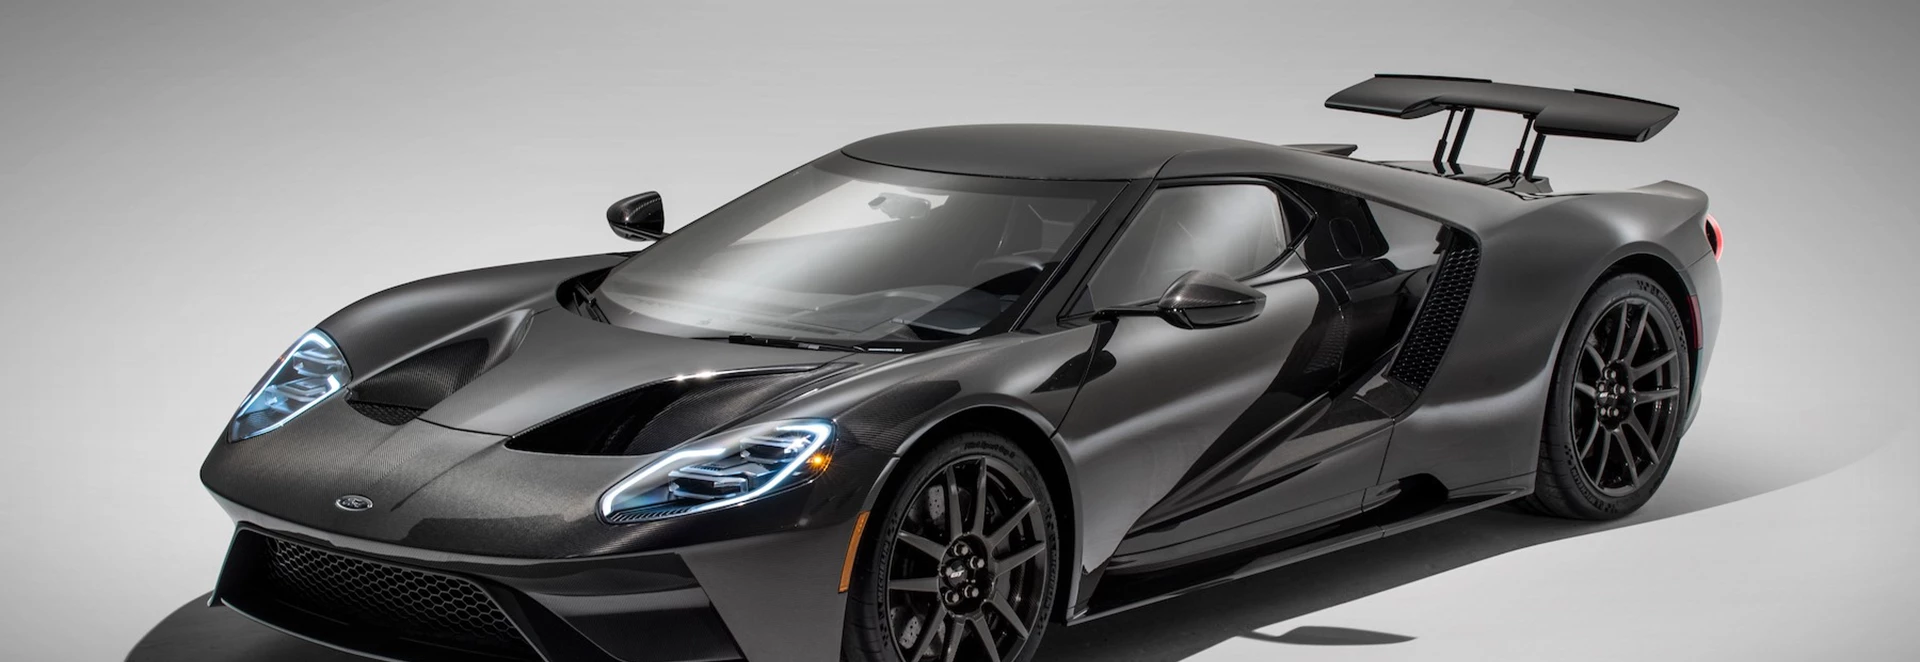 Ford announces updated GT supercar for 2020